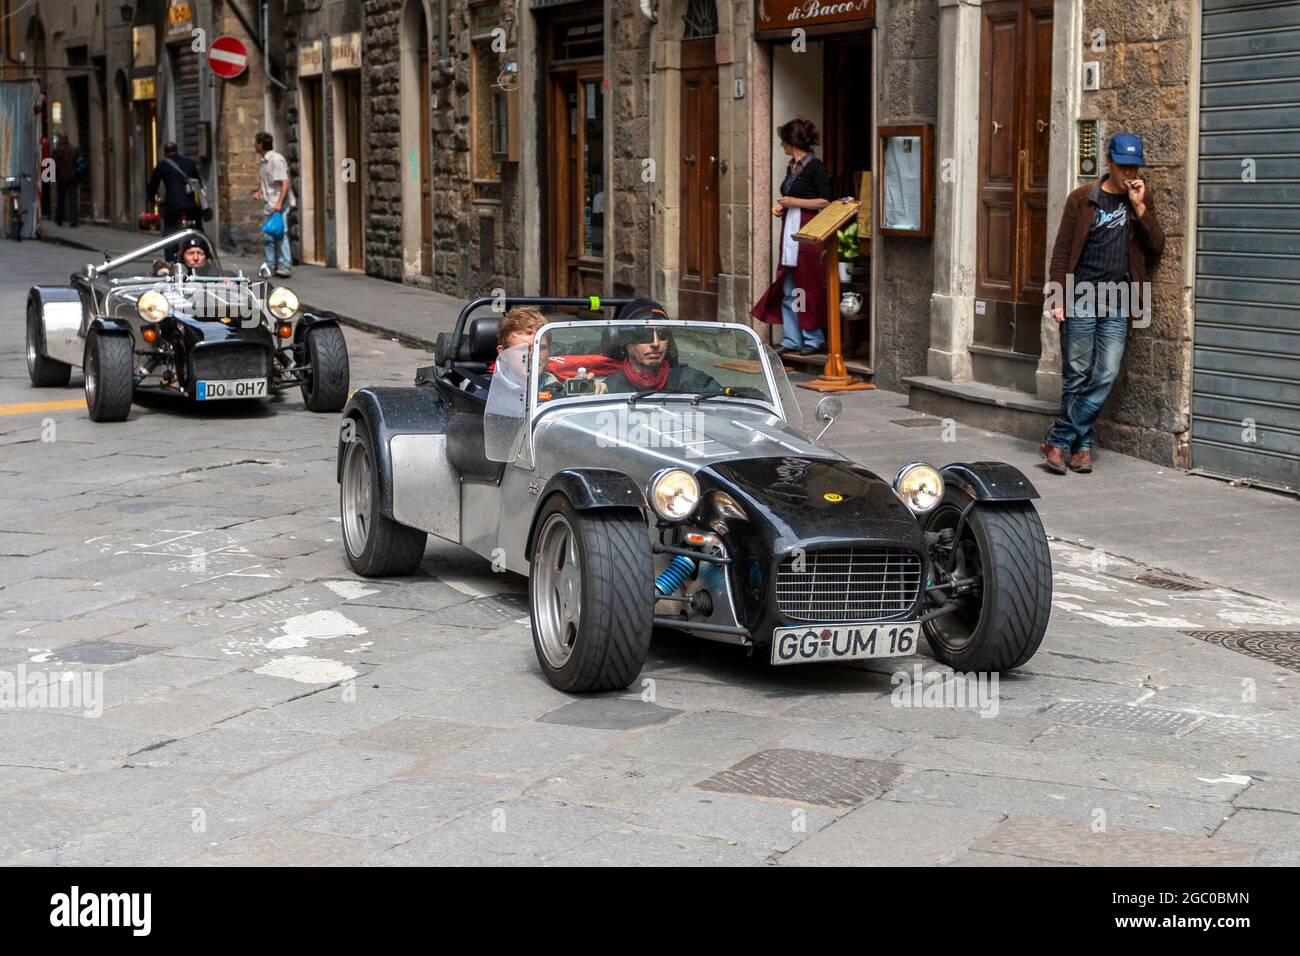 Florence, Italy - May 8, 2010: Super 7 in the rally Mille Miglia 2010 edition on a busy street in Florence. Stock Photo